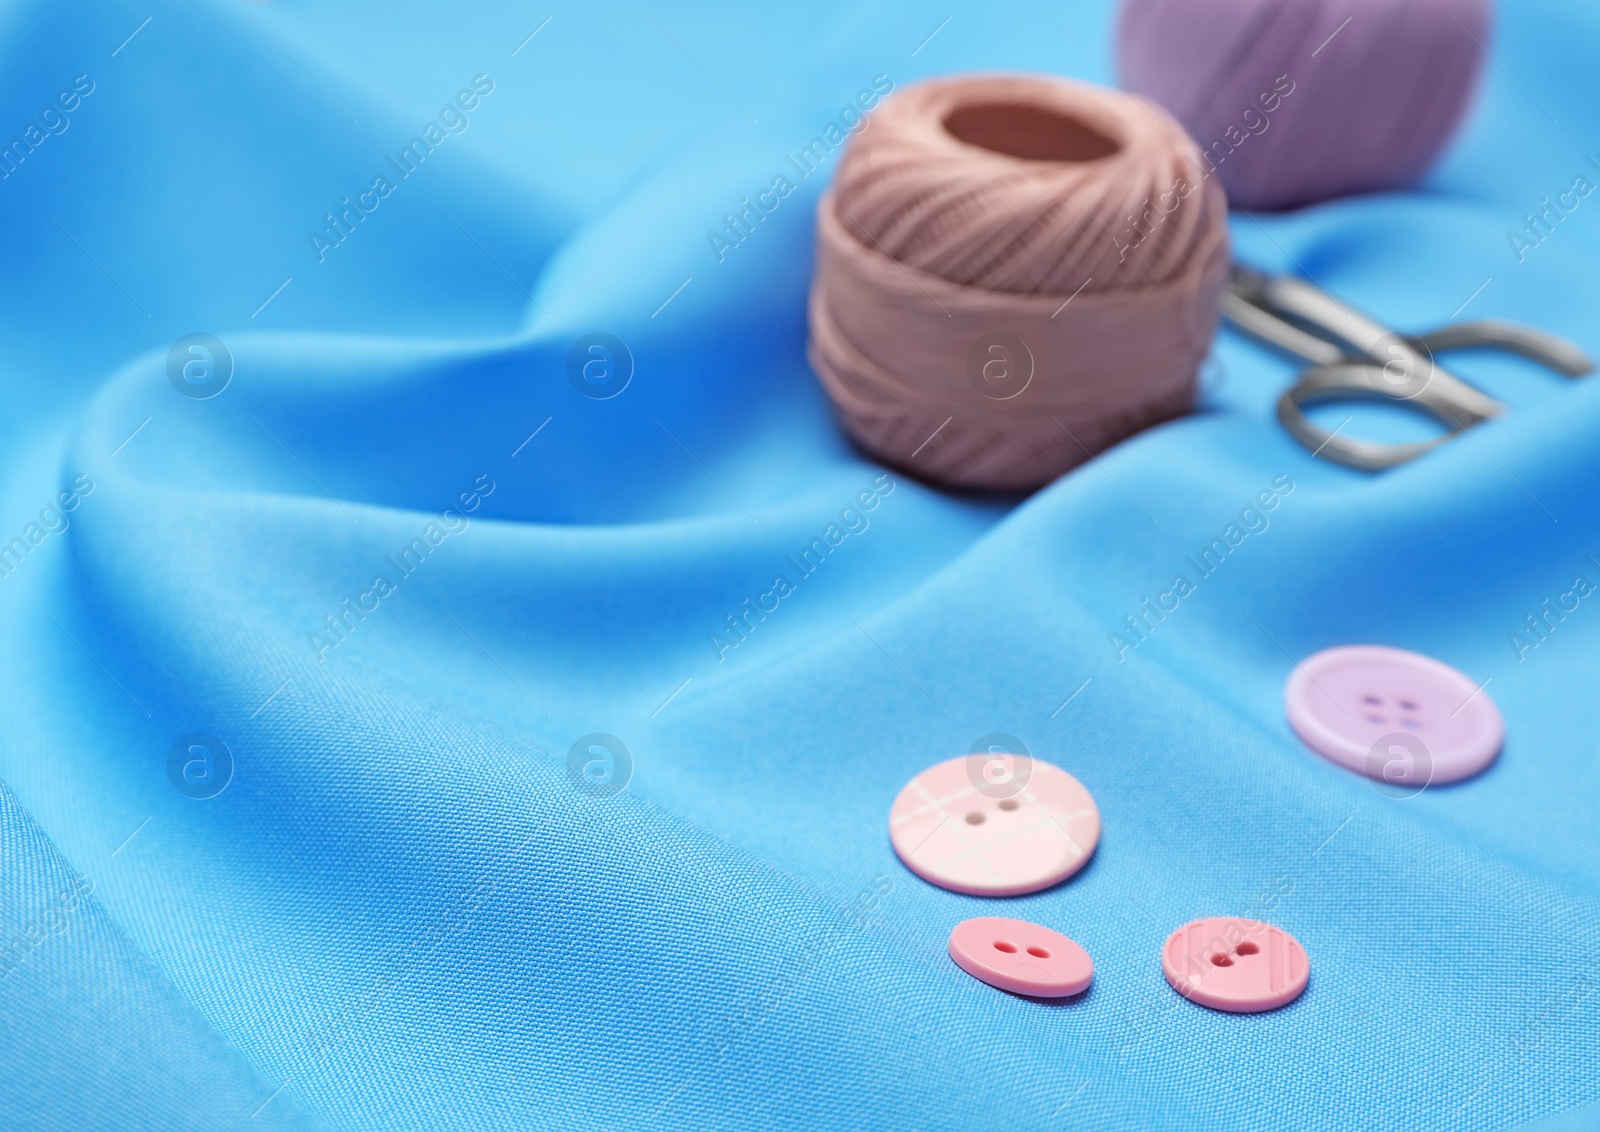 Photo of Composition with threads and sewing accessories on fabric